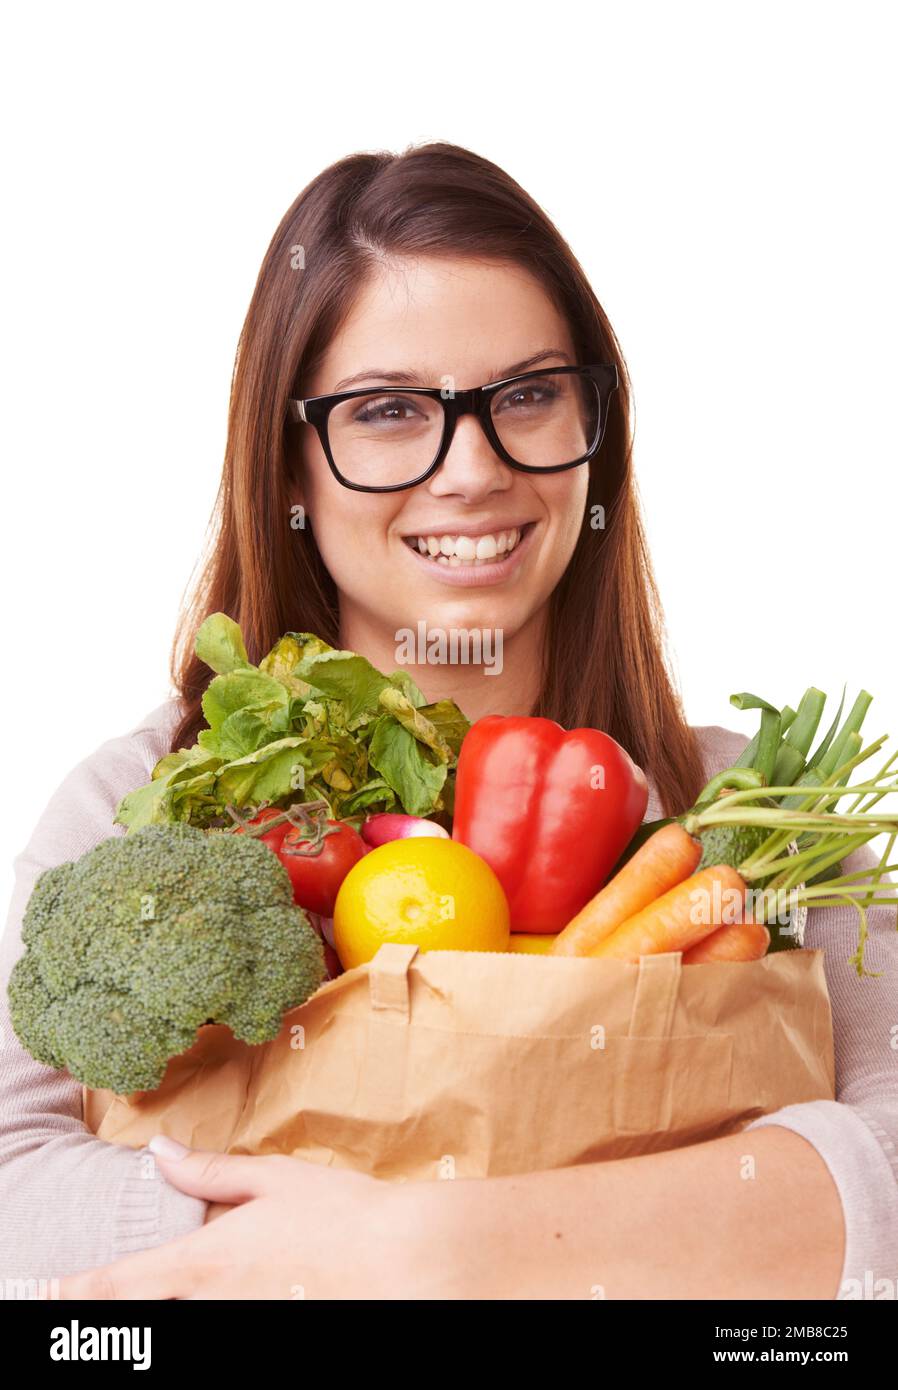 Shes conscious about eating healthy. Portrait of a beautiful young woman holding a bag of groceries. Stock Photo